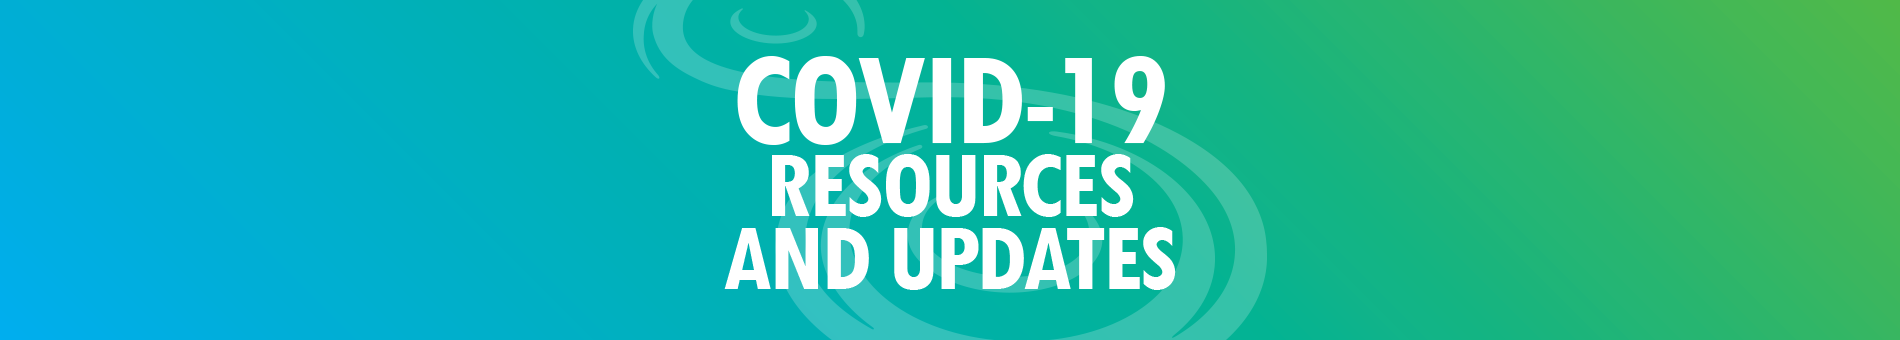 Banner image for COVID-19